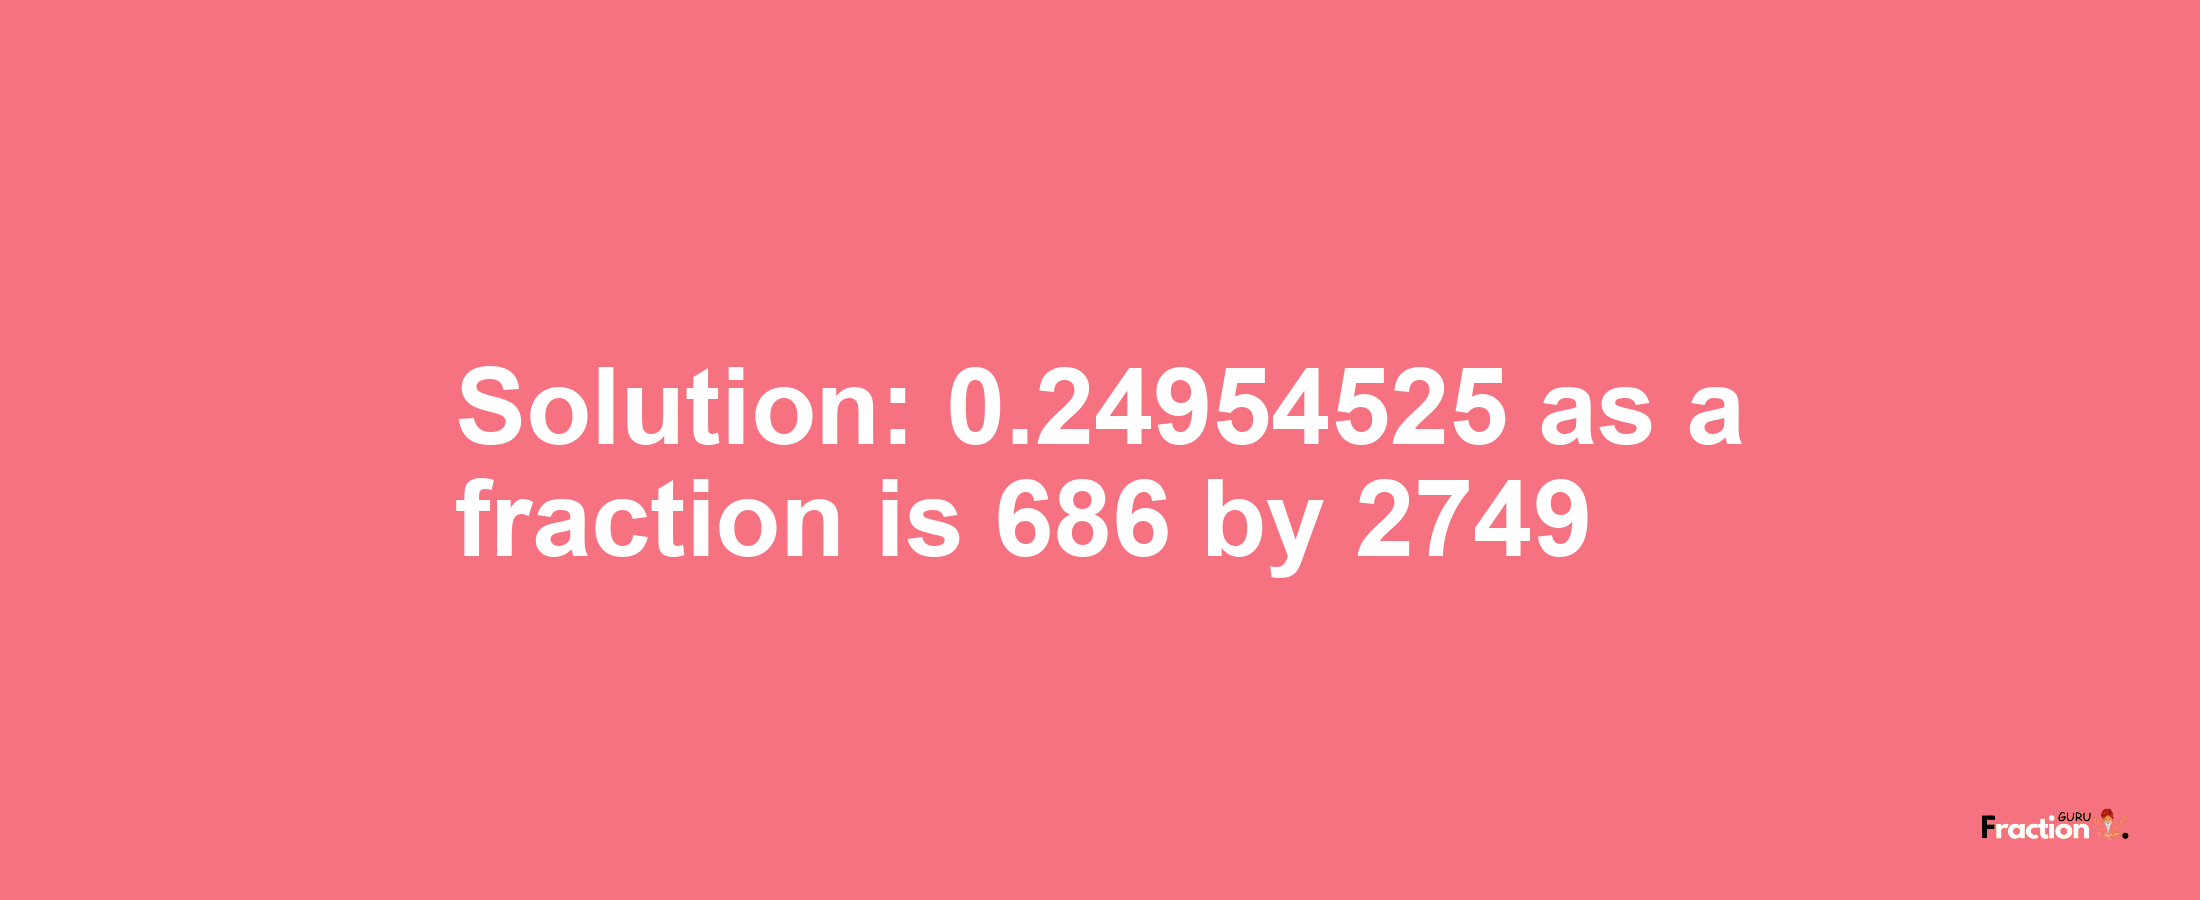 Solution:0.24954525 as a fraction is 686/2749